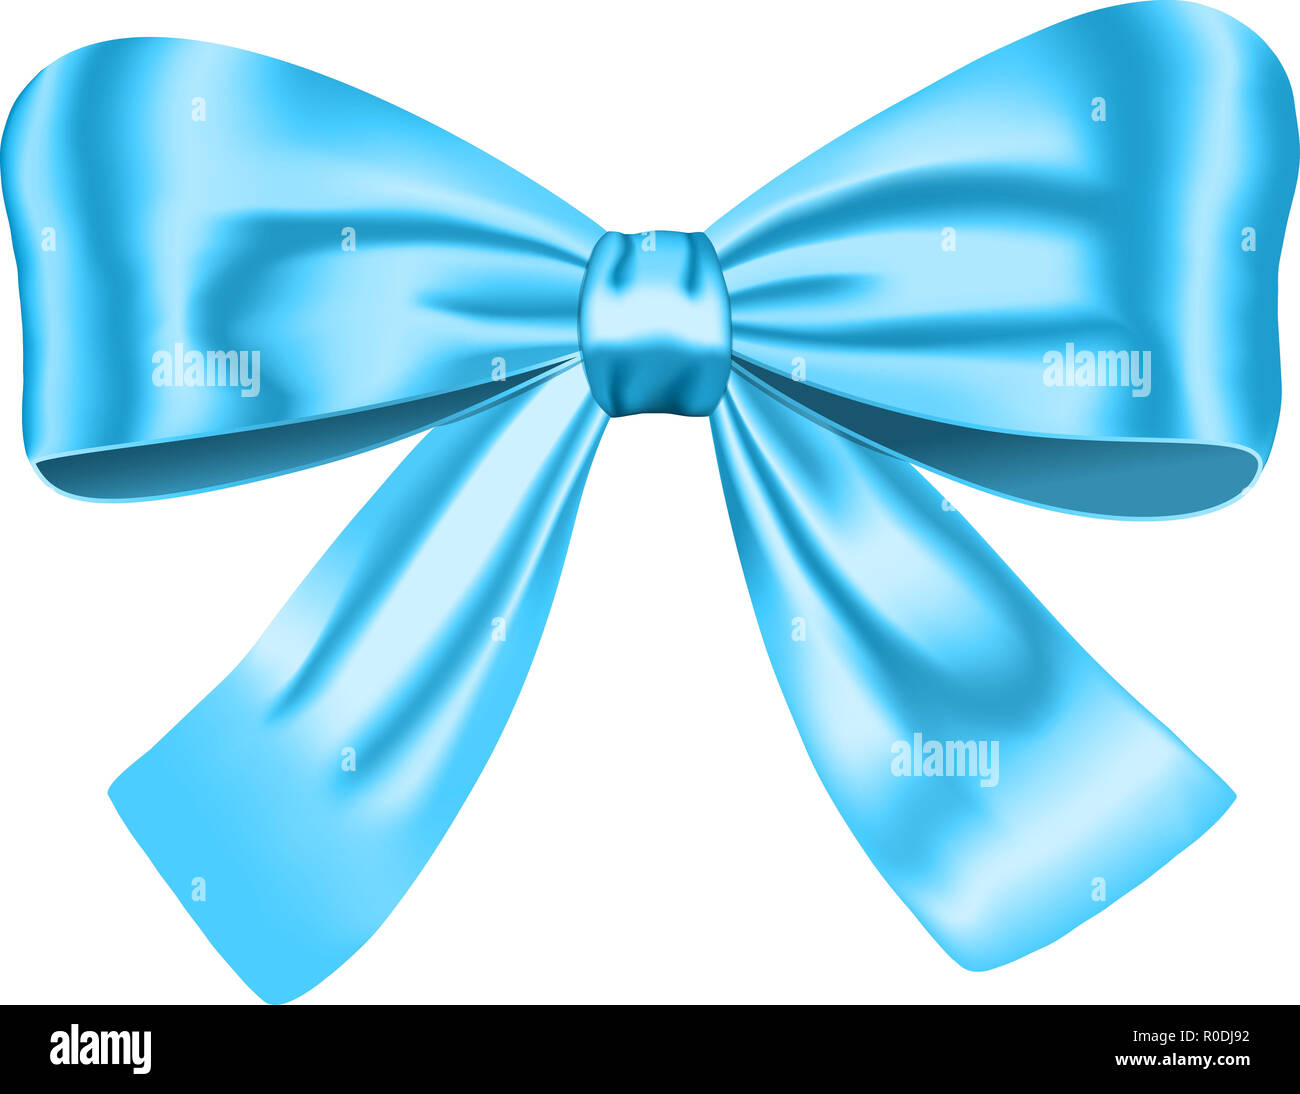 Blue satin bow made of thin smooth ribbon. Digital illustration on a white  background. Decorative element for holidays, packaging, clothing, interior  Stock Photo - Alamy